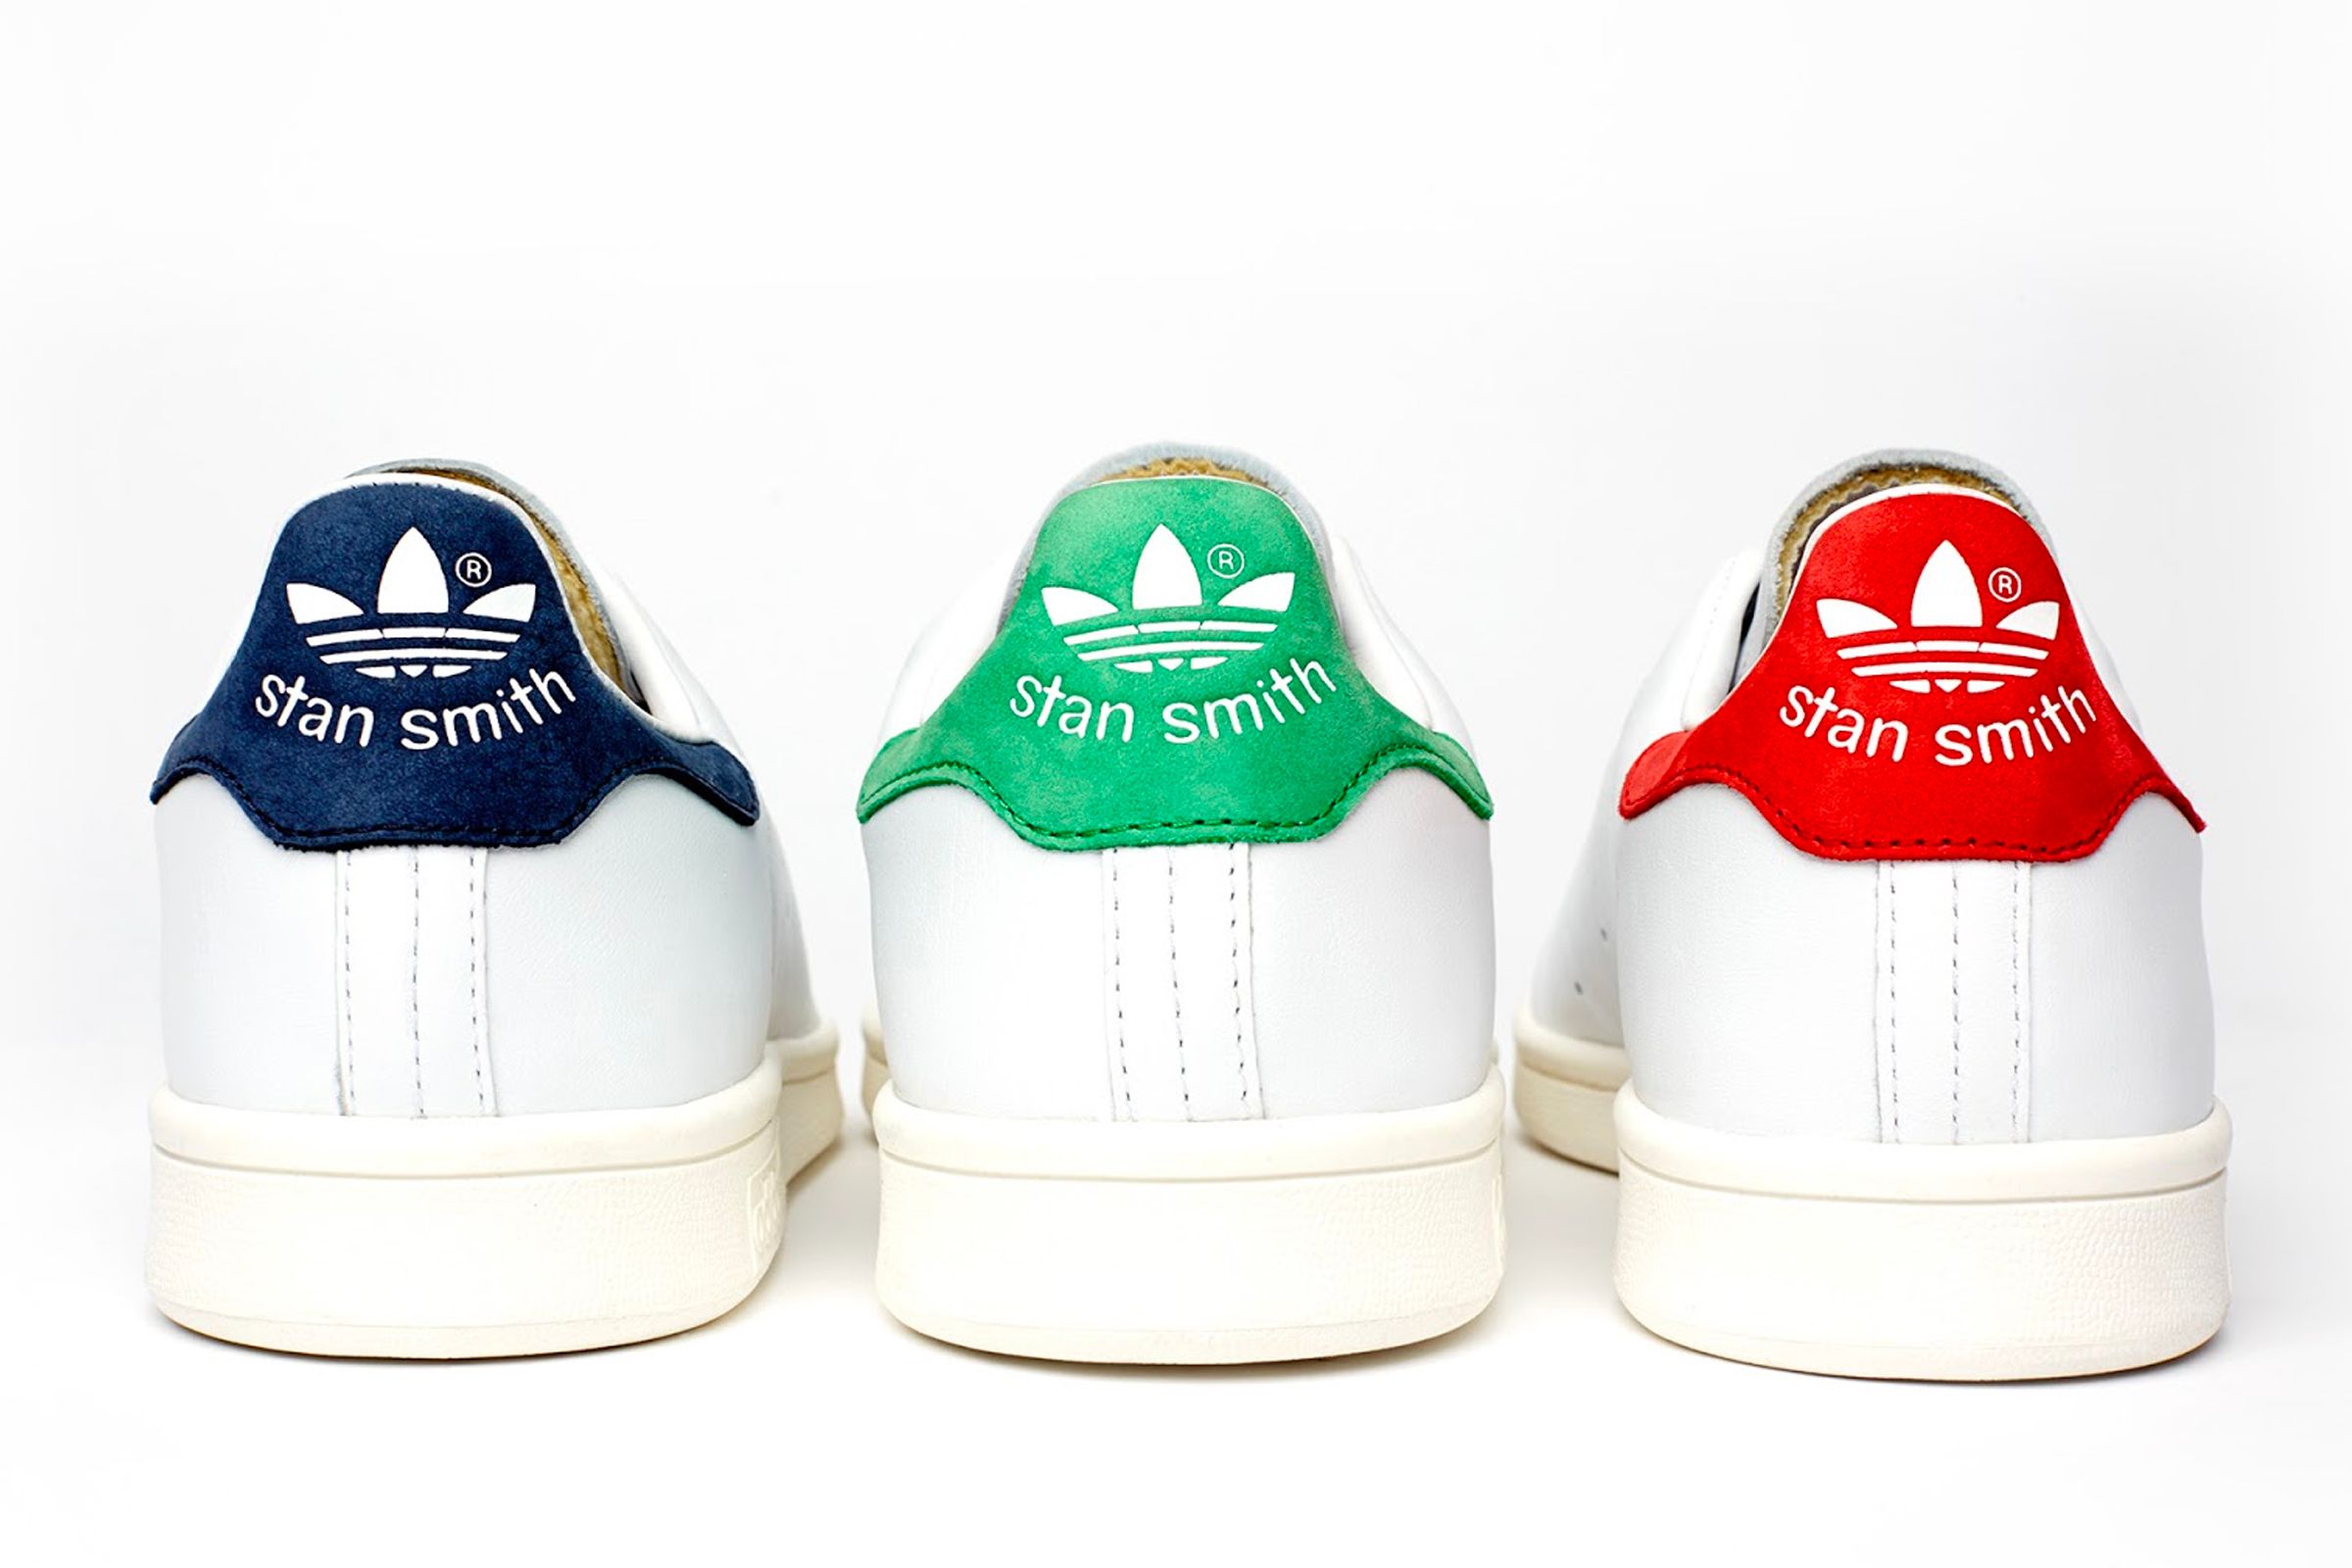 More Than Just a Man: A History of the adidas Stan Smith